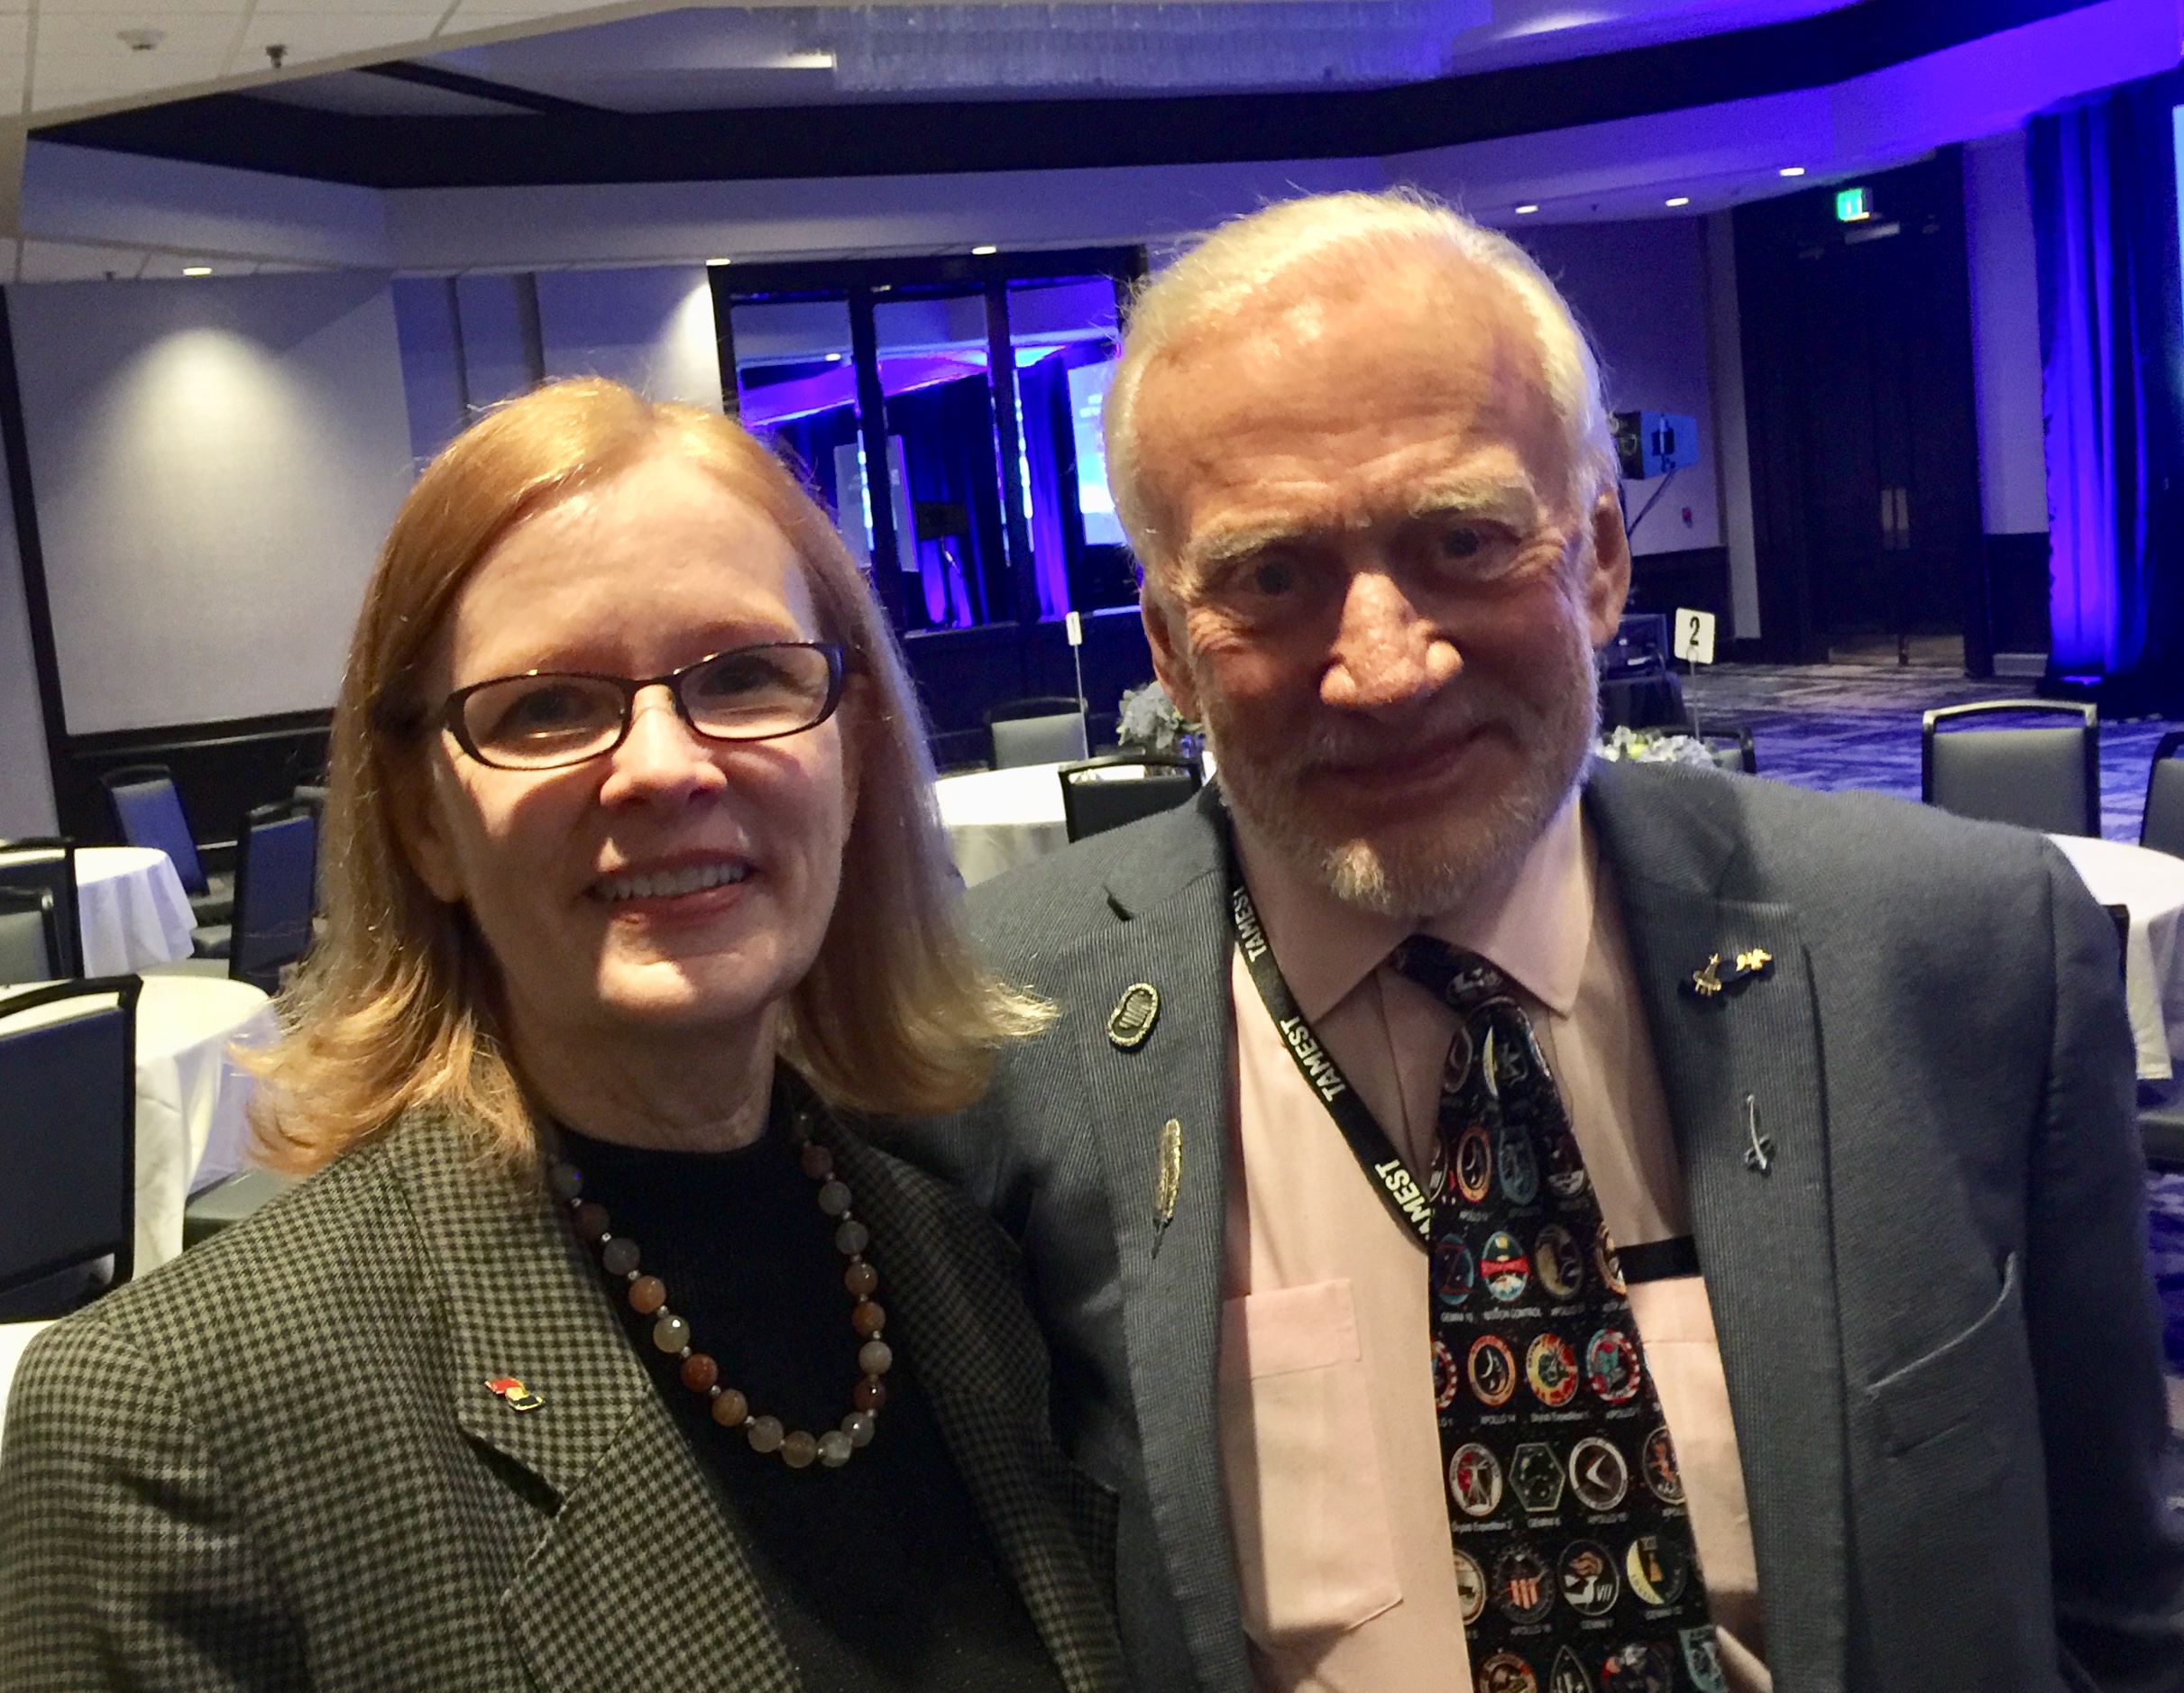 Hanging out with my famous coauthor, Buzz Aldrin in 2018